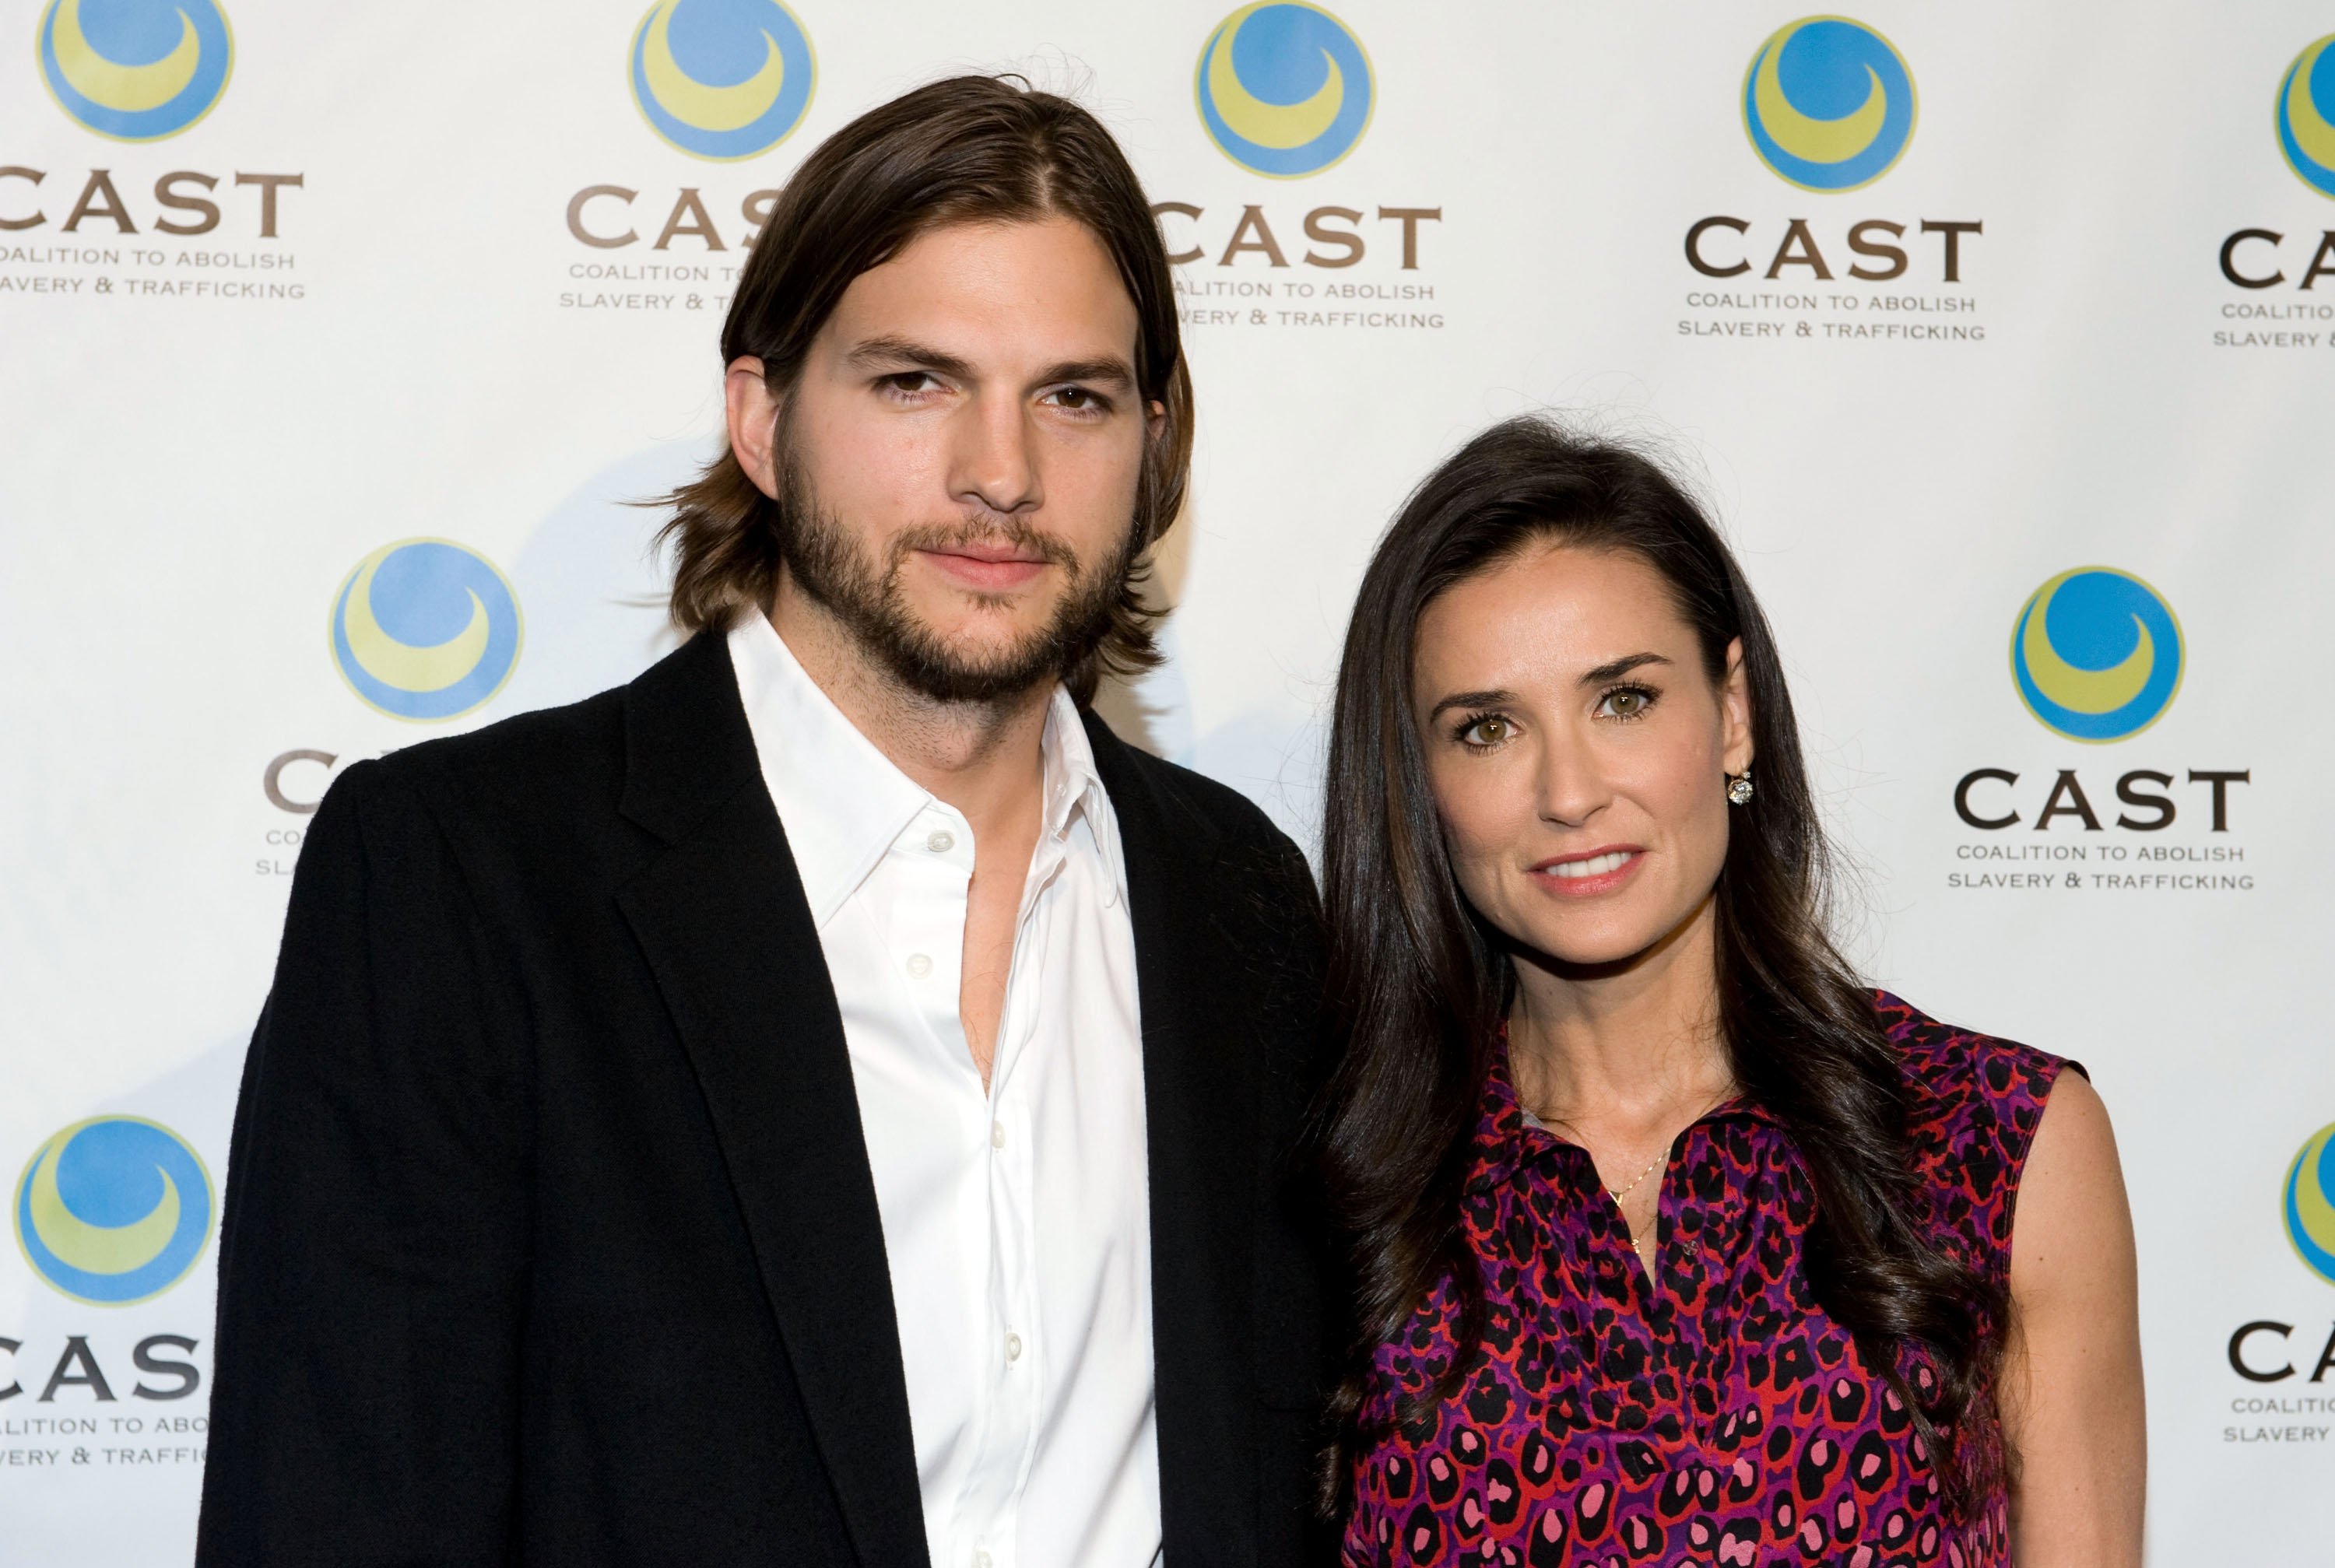 Actor Ashton Kutcher (L) and actress Demi Moore arrive at the Coalition to Abolish Slavery & Trafficking's 13th Annual Gala at the Skirball Cultural Center on May 12, 2011 in Los Angeles, California.